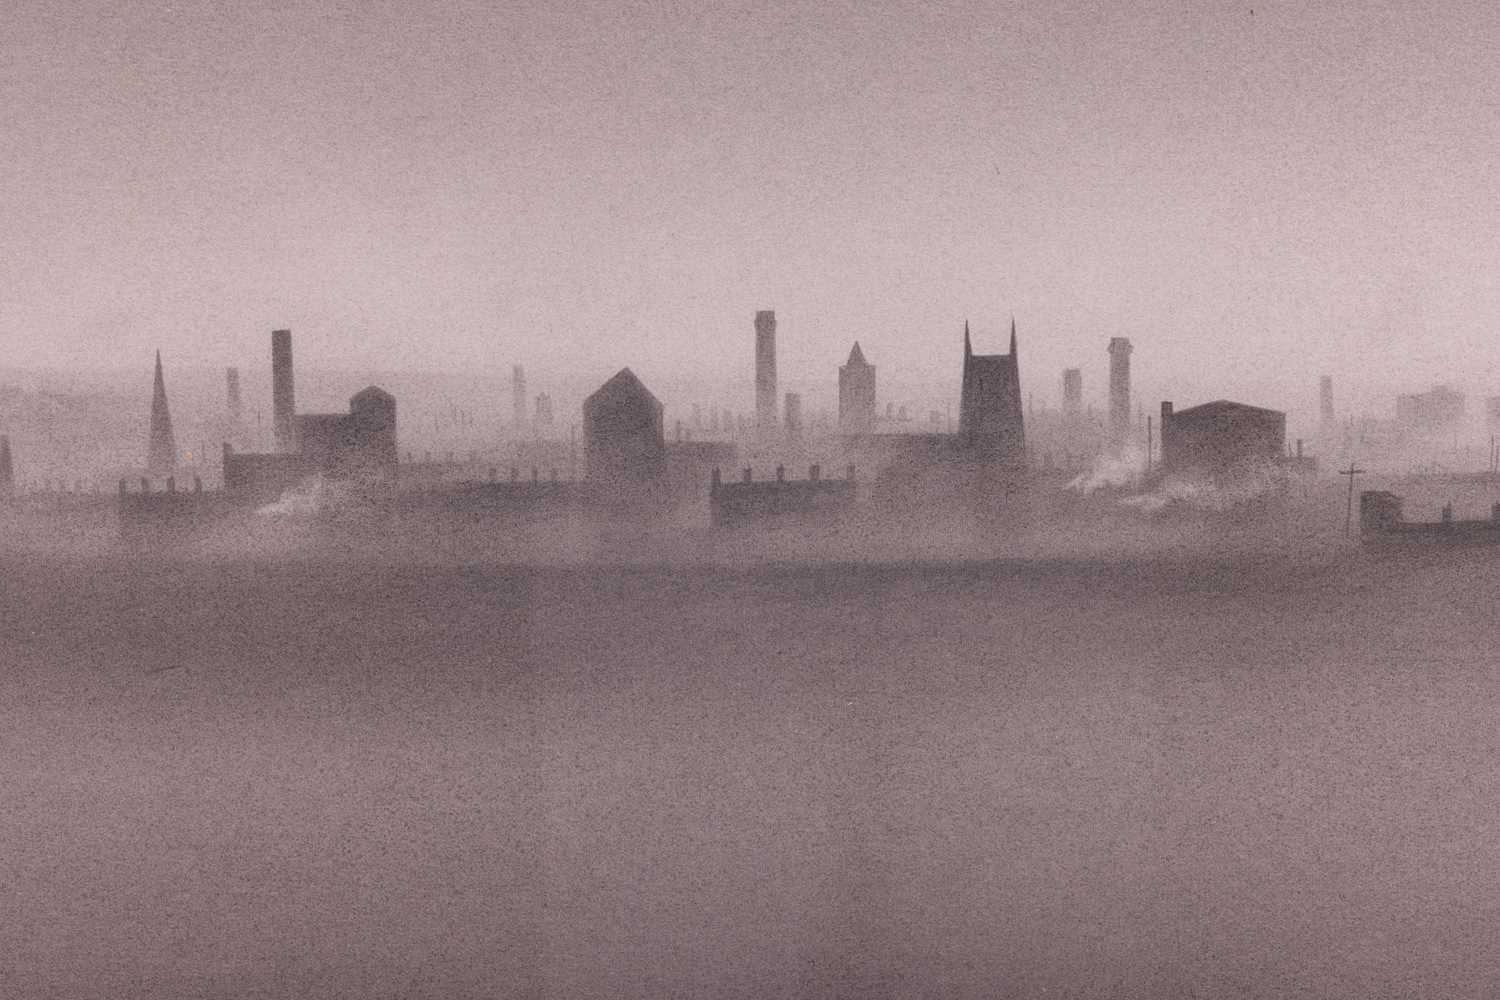 Trevor Grimshaw (1947 - 2001), Northern Industrial Scene, signed and dated 'T. Grimshaw '70' in penc - Image 7 of 12